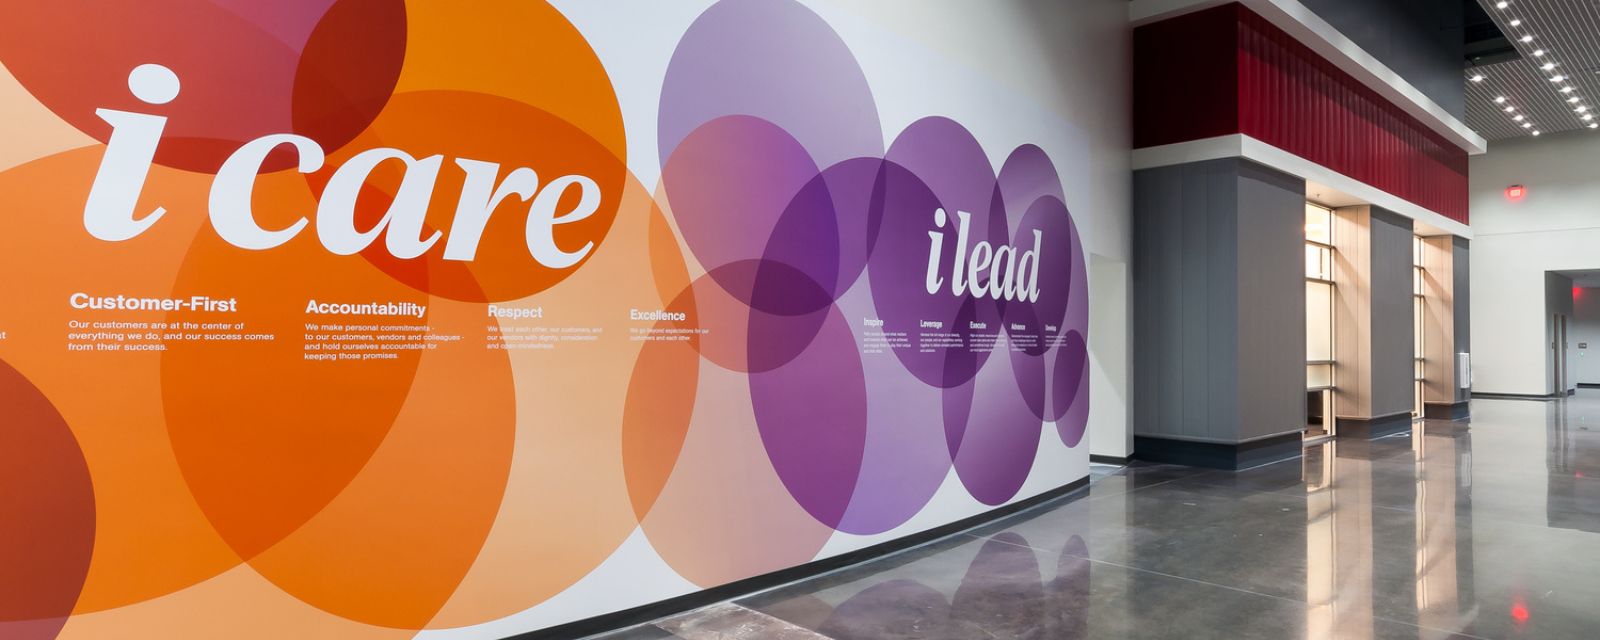 Wall decals inside McKesson Specialty Health in Dallas-Fort Worth.